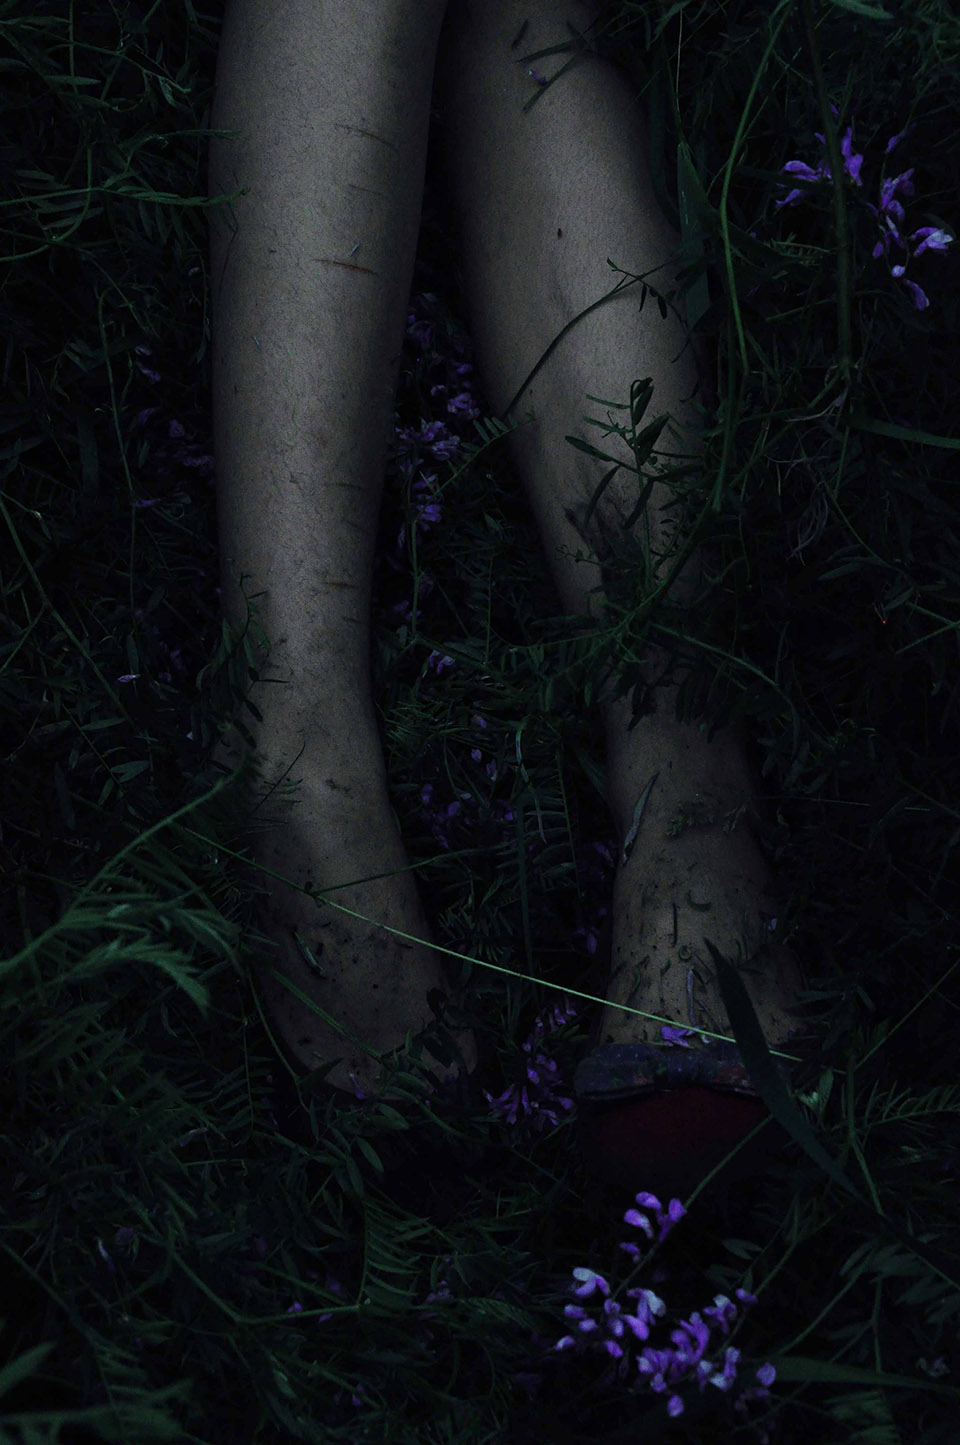 Photo by Yevgenia “Jane” Laptii - two legs rest on top of grass and purple flowers